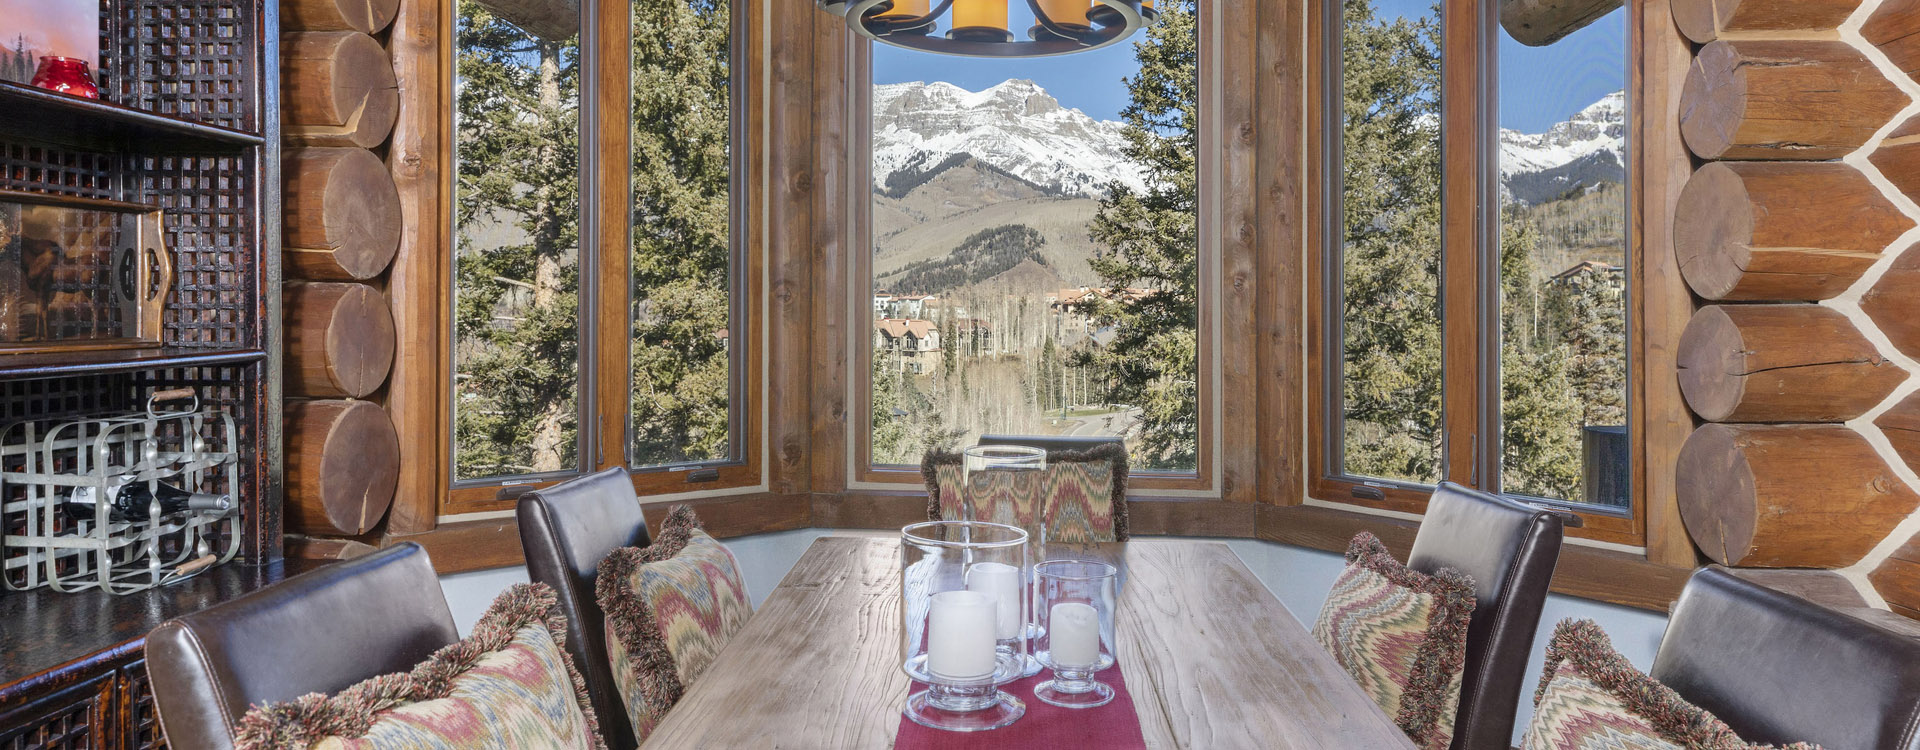 4.02-Mountain-Village-Vacation-Happy-Place-Dining-Room-2